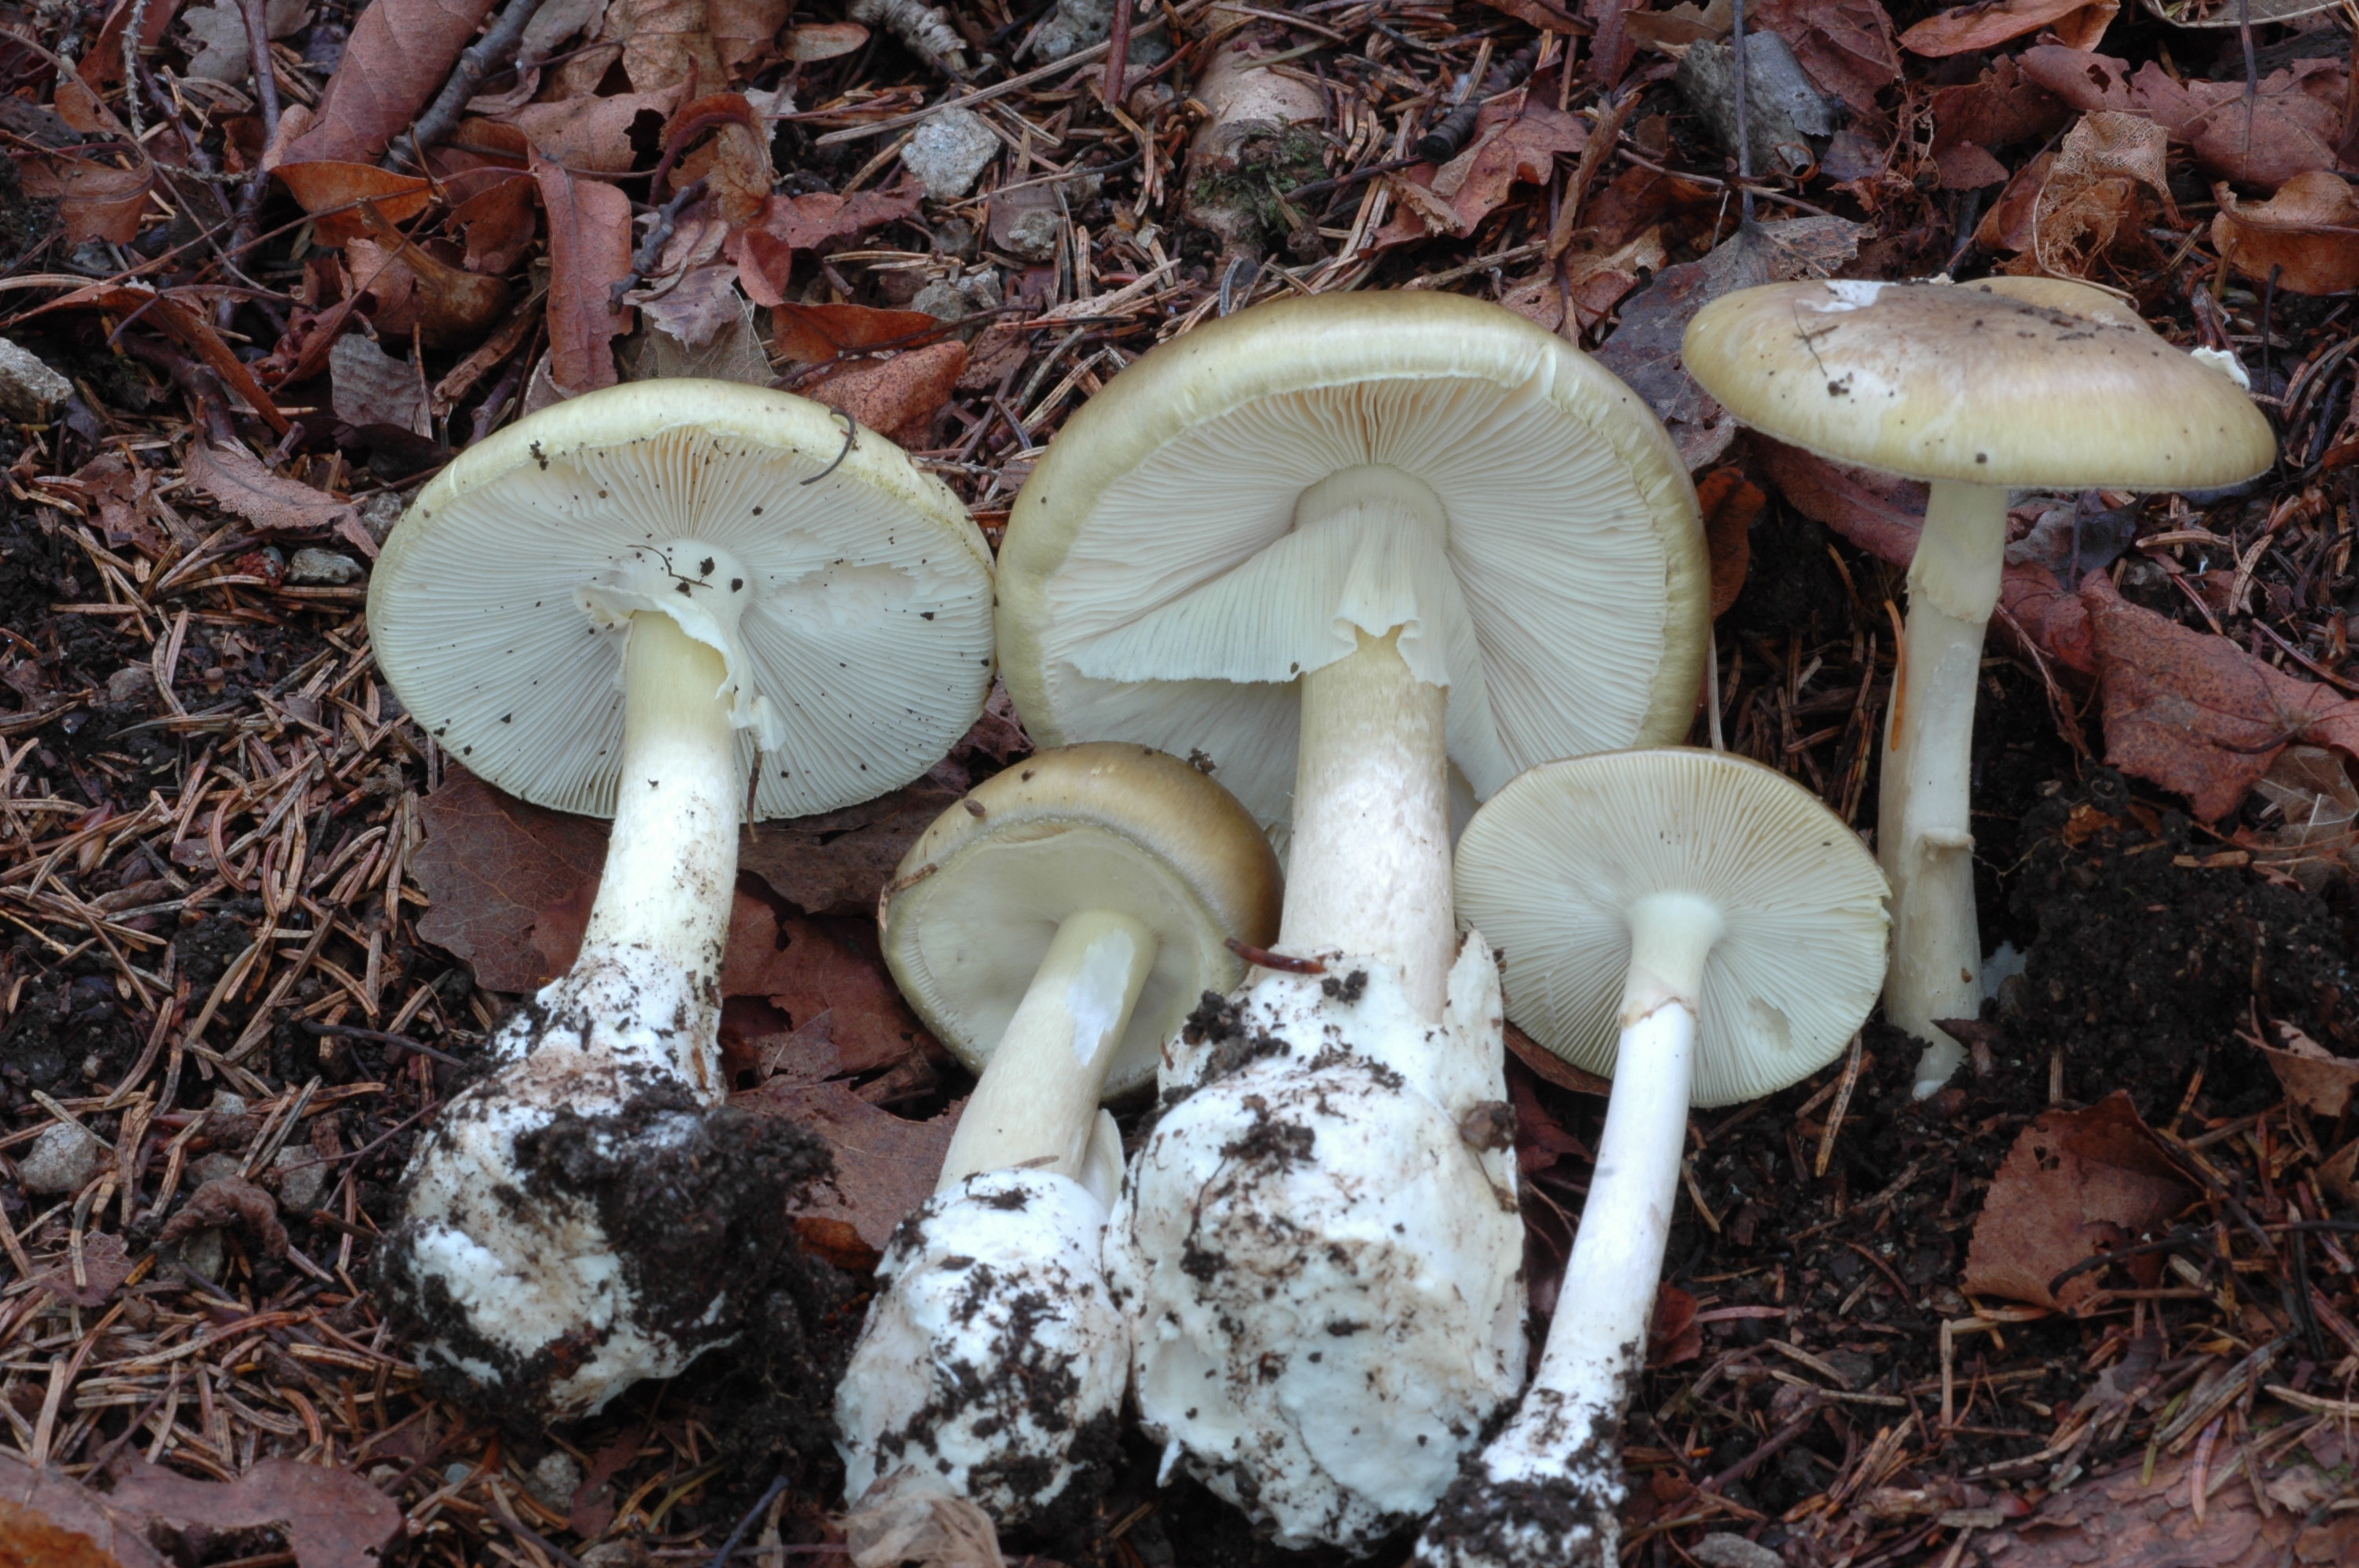 Death caps with white stipes and gills. 